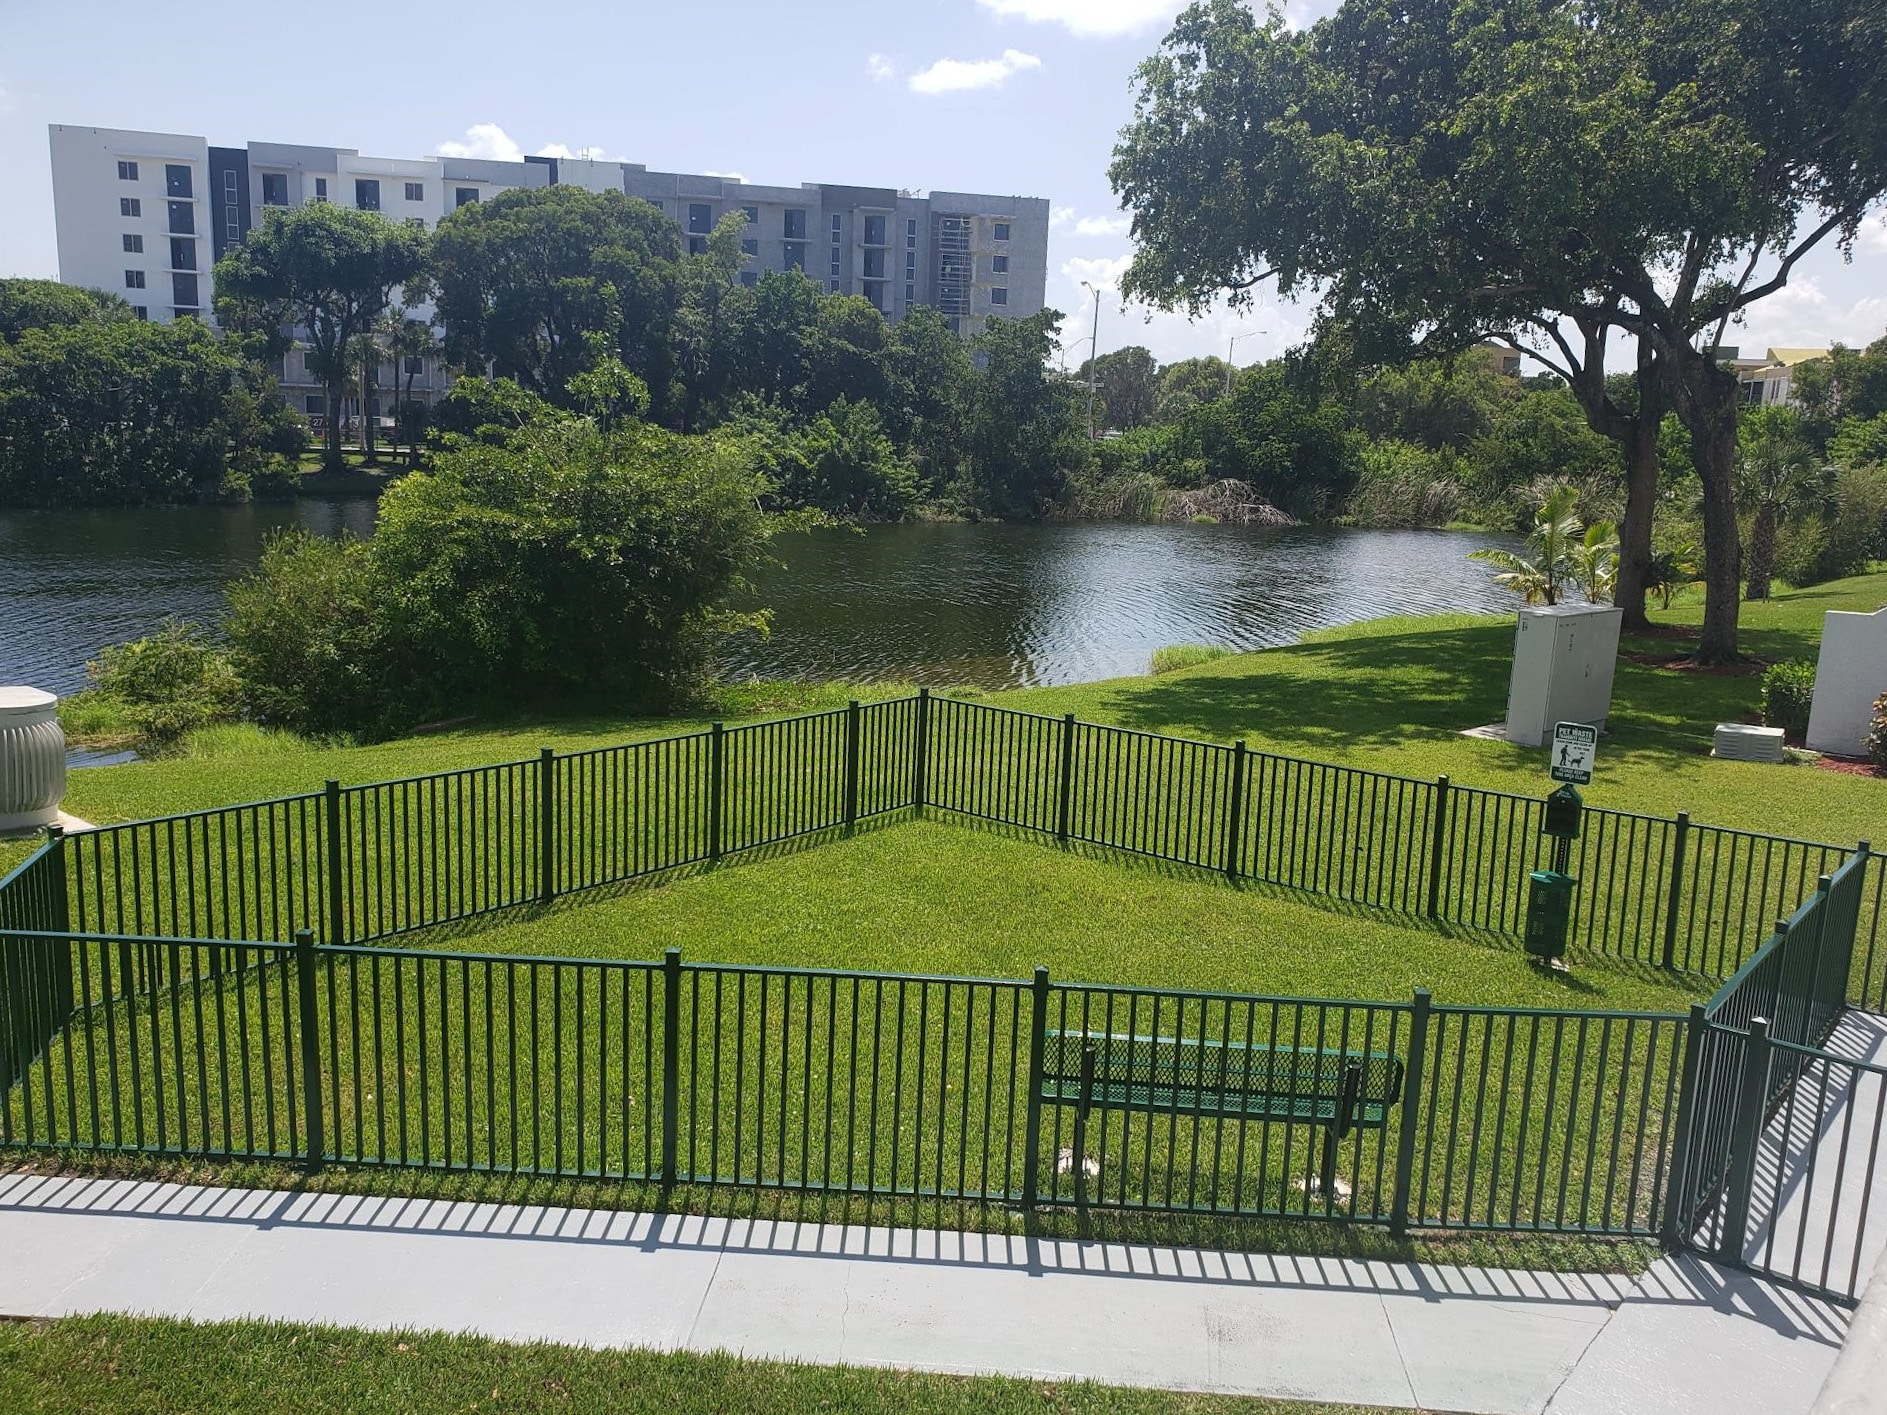 Fenced dog park area with green grass and bench for sitting